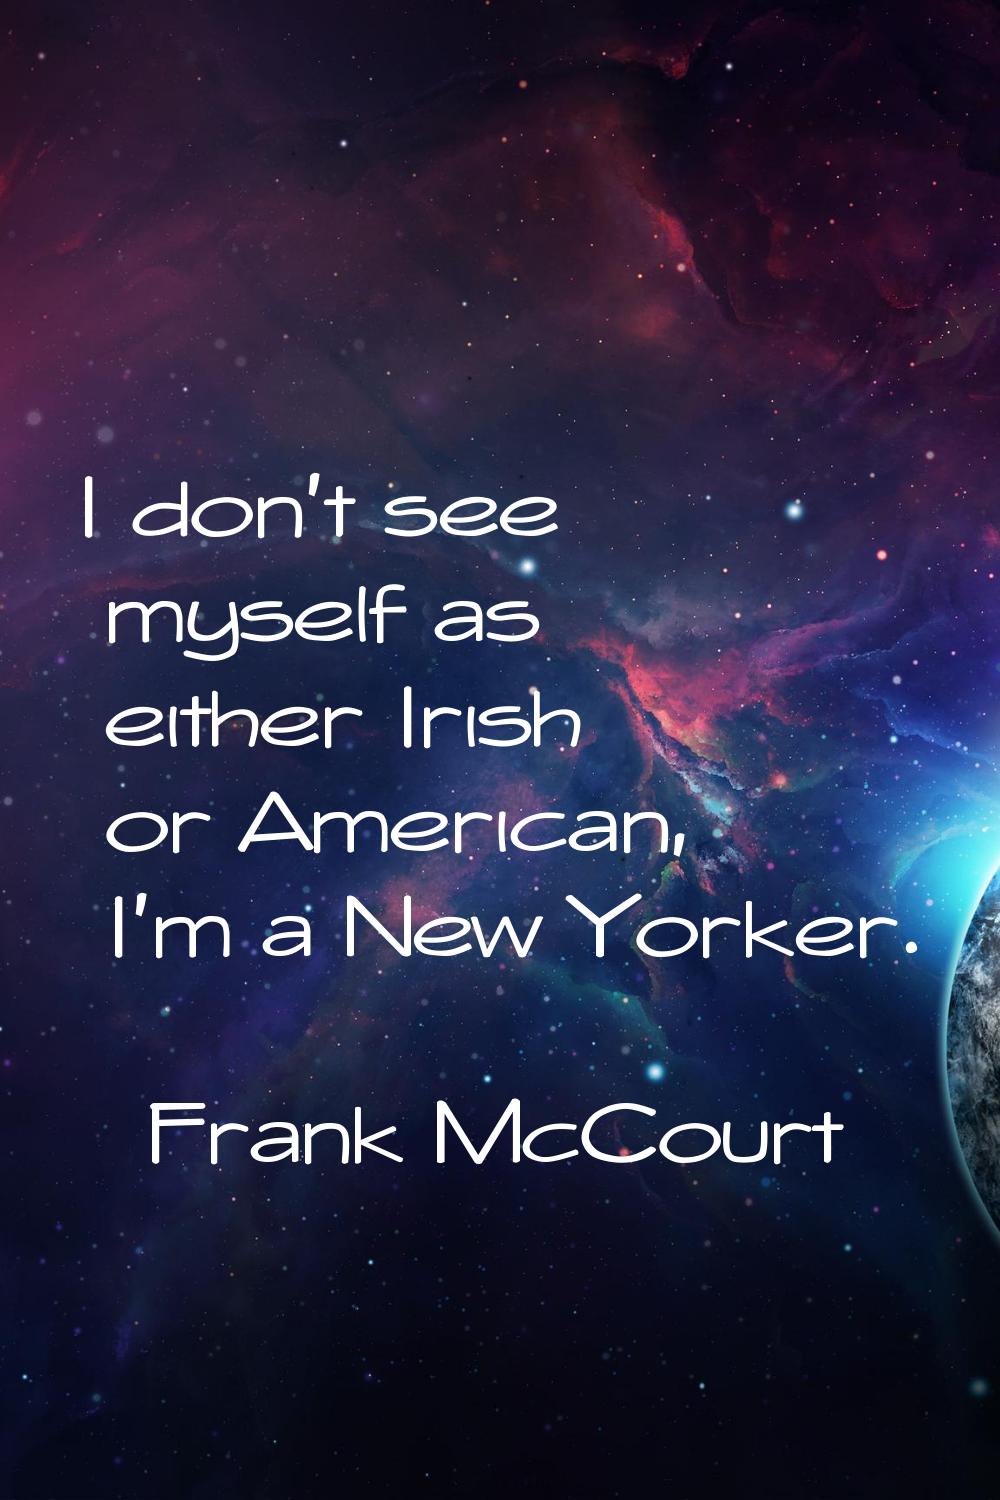 I don't see myself as either Irish or American, I'm a New Yorker.